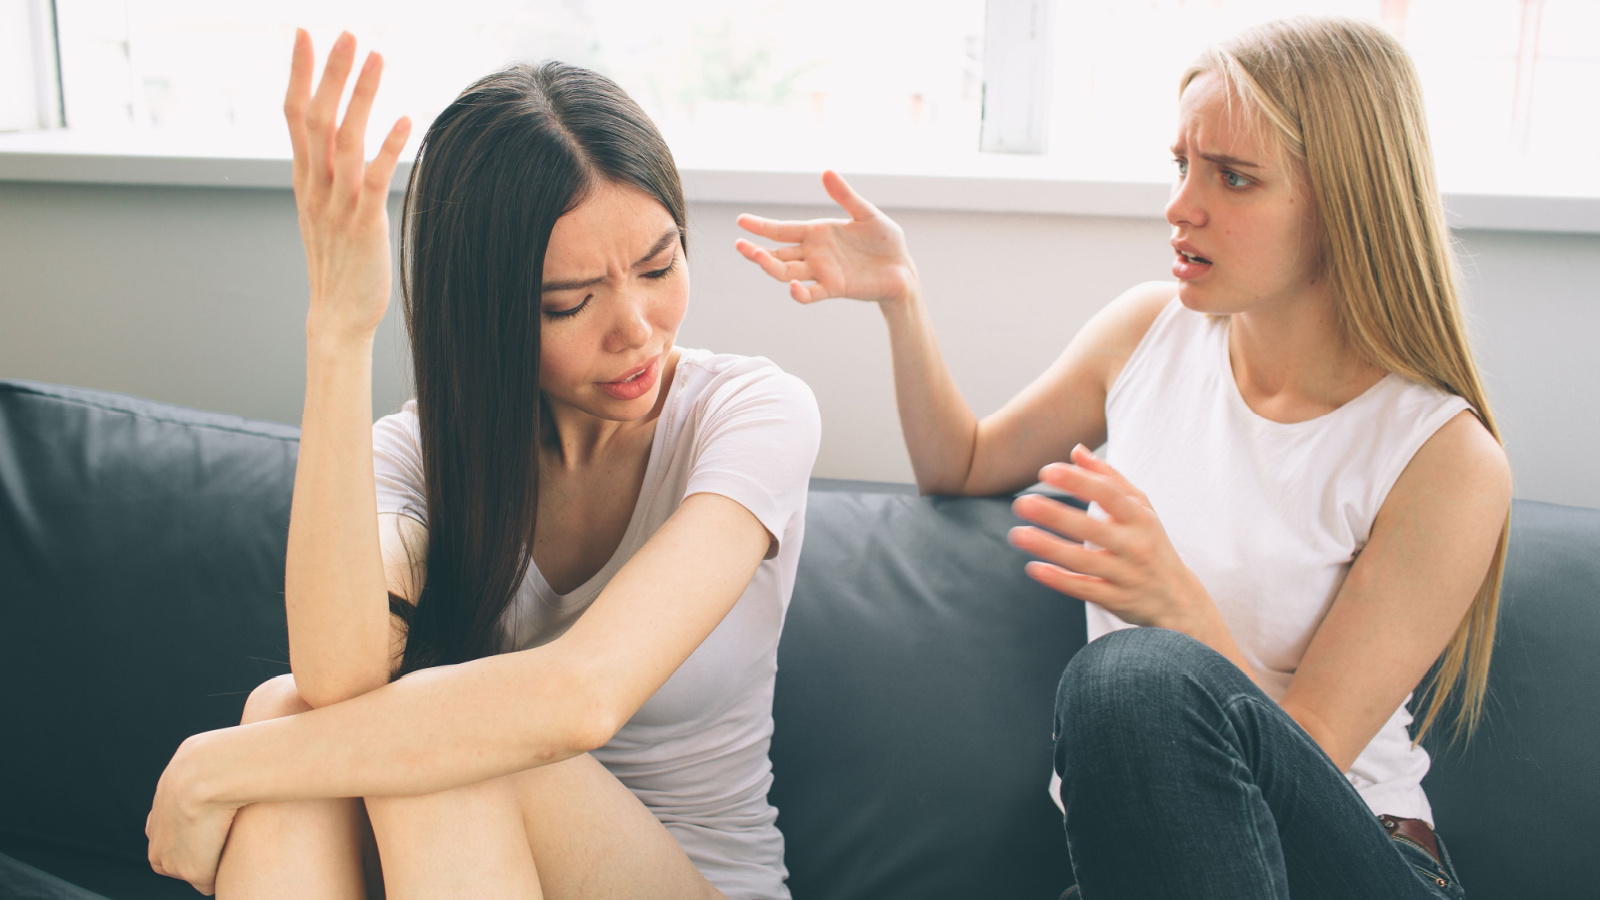 image credit: Estrada-Anton/shutterstock <p><span>Online arguments between family members can spill over into real-life interactions. A heated Facebook debate can set the tone for the next family gathering, where tensions are already high. These online interactions can damage relationships and create a hostile family environment. The line between online and offline becomes blurred, affecting real-world relationships.</span></p>